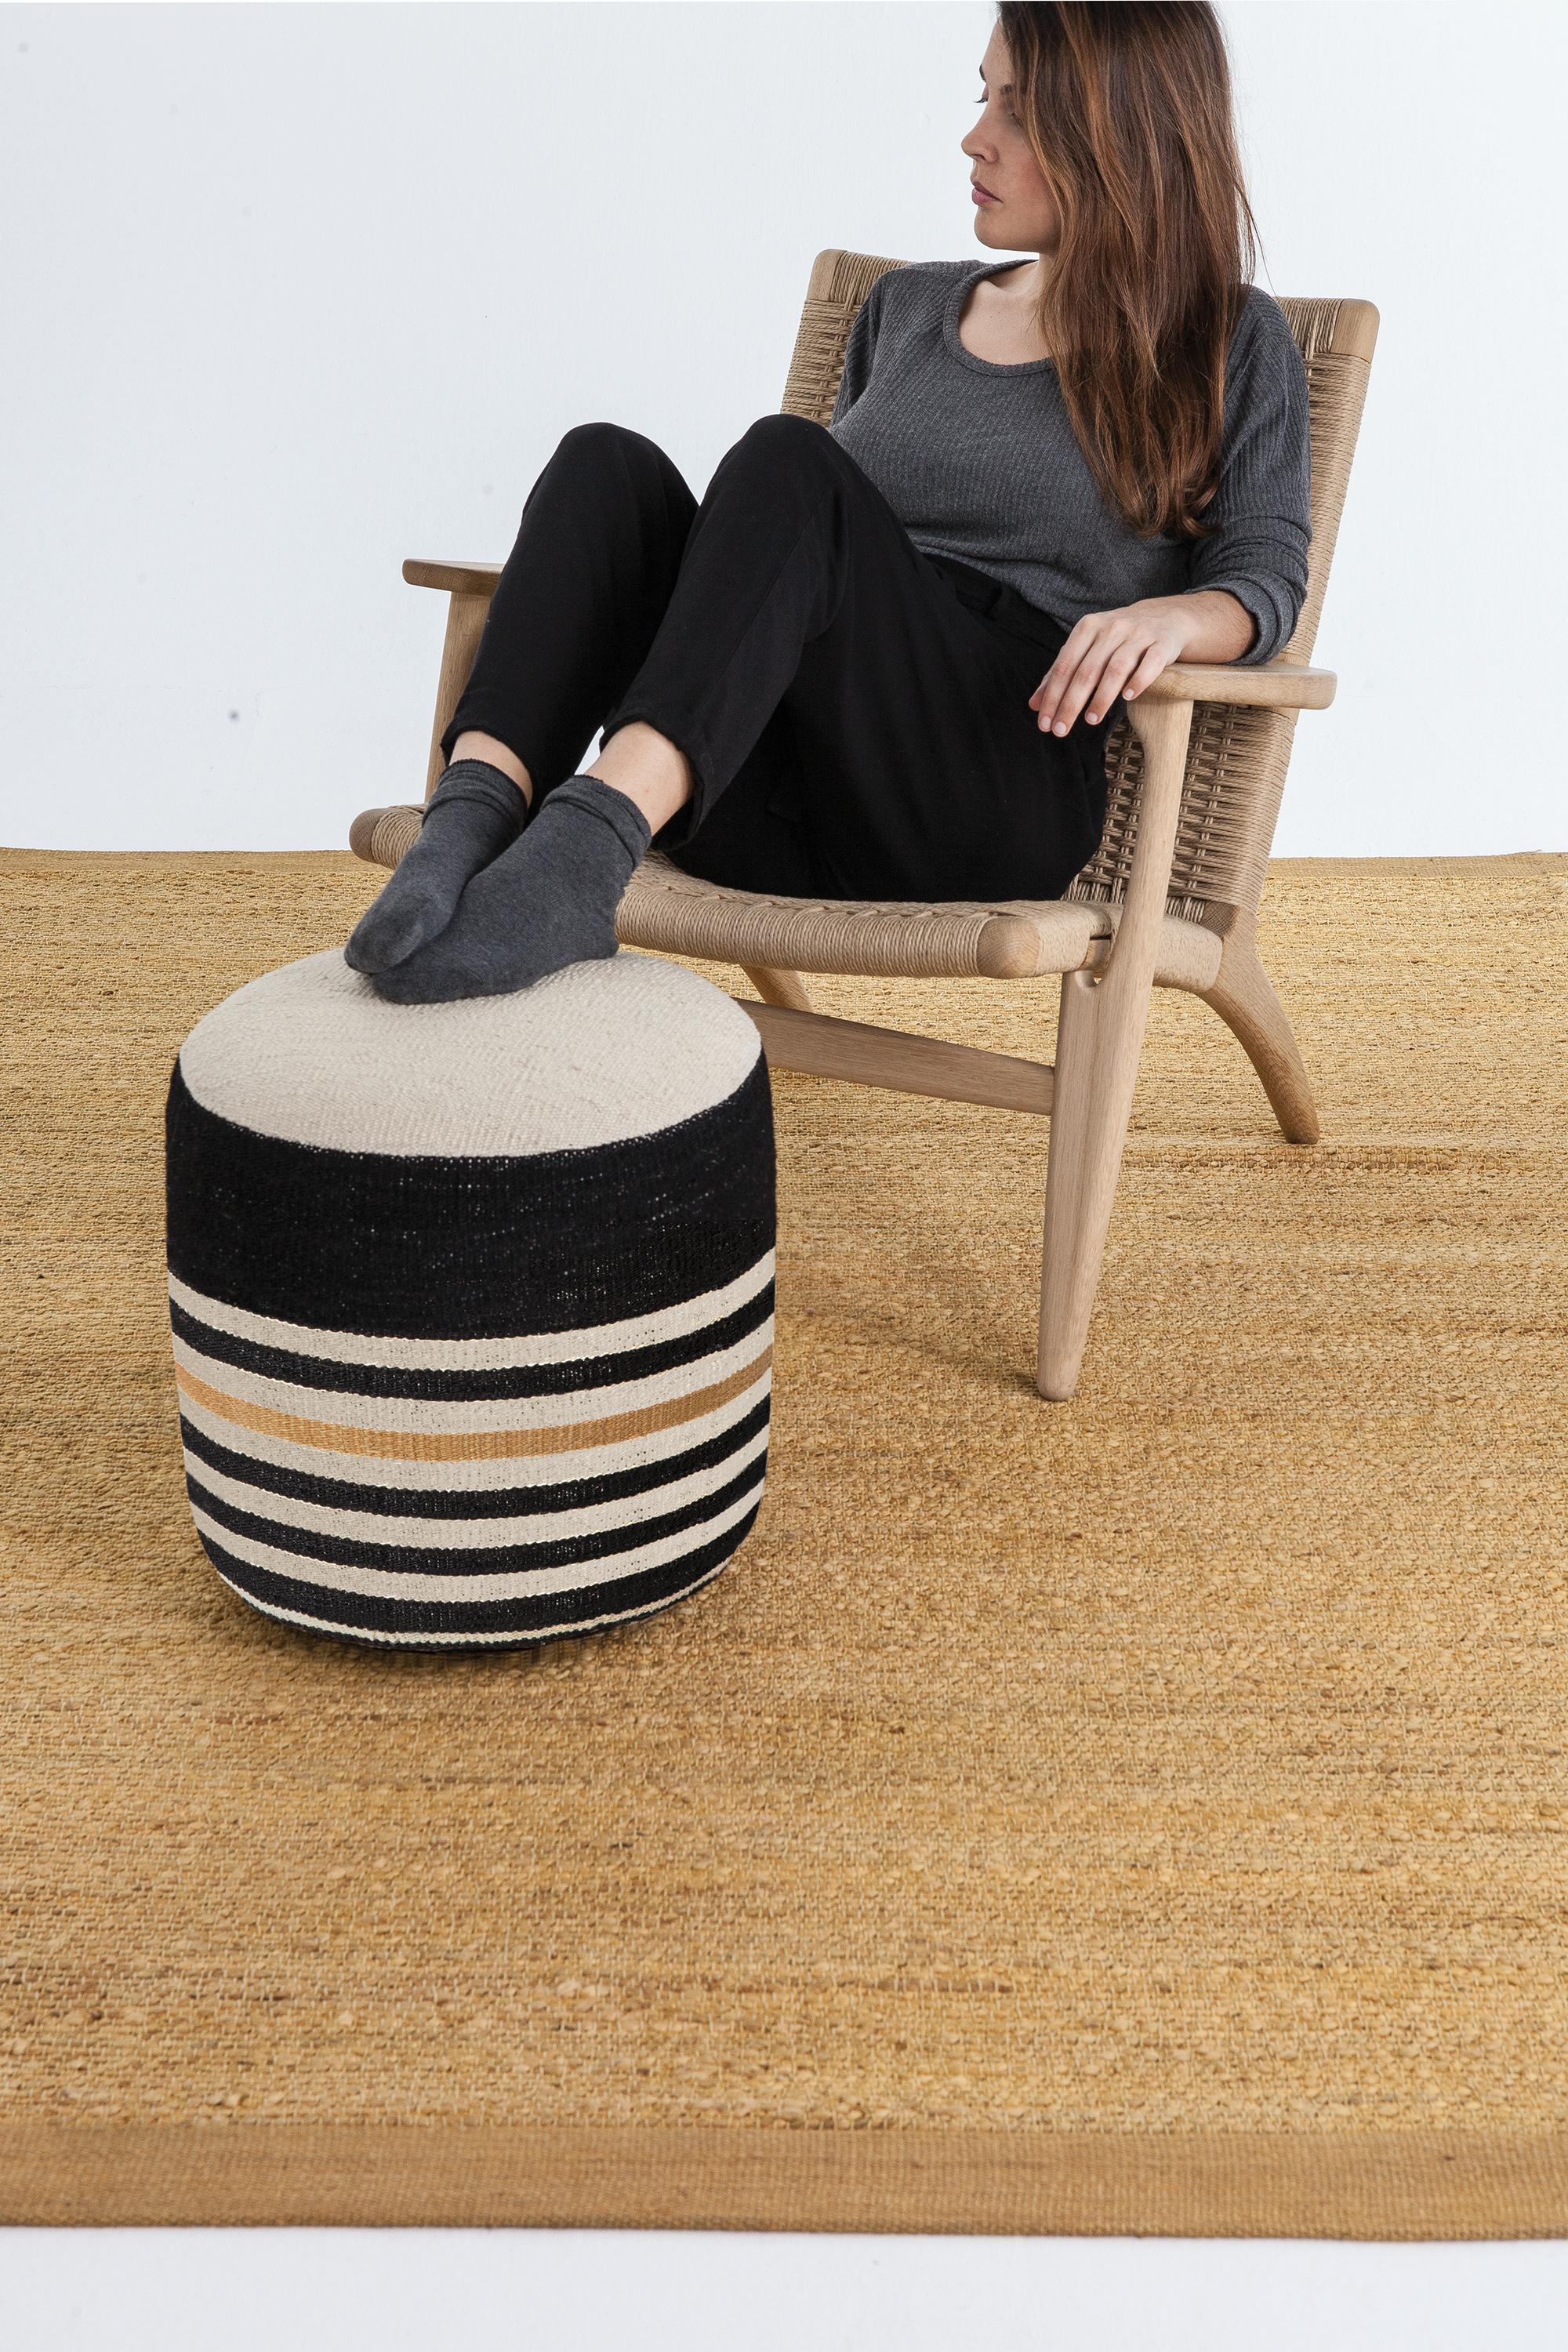 Contemporary 'Kilim 1' Pouf by Nani Marquina and Marcos Catalán for Nanimarquina For Sale